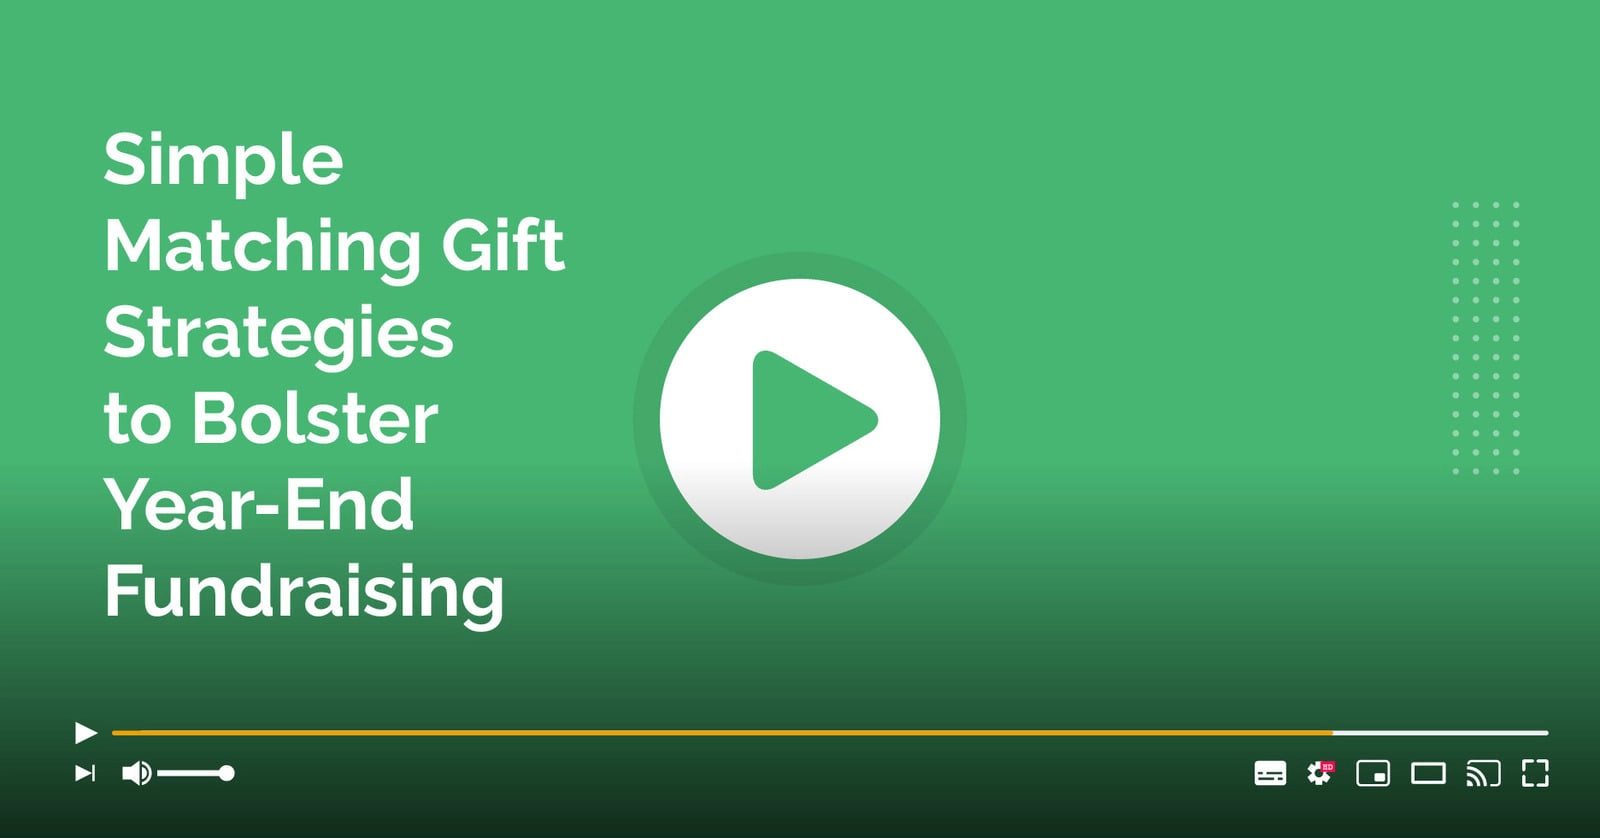 Simple Matching Gift Strategies to Bolster Year-End Fundraising